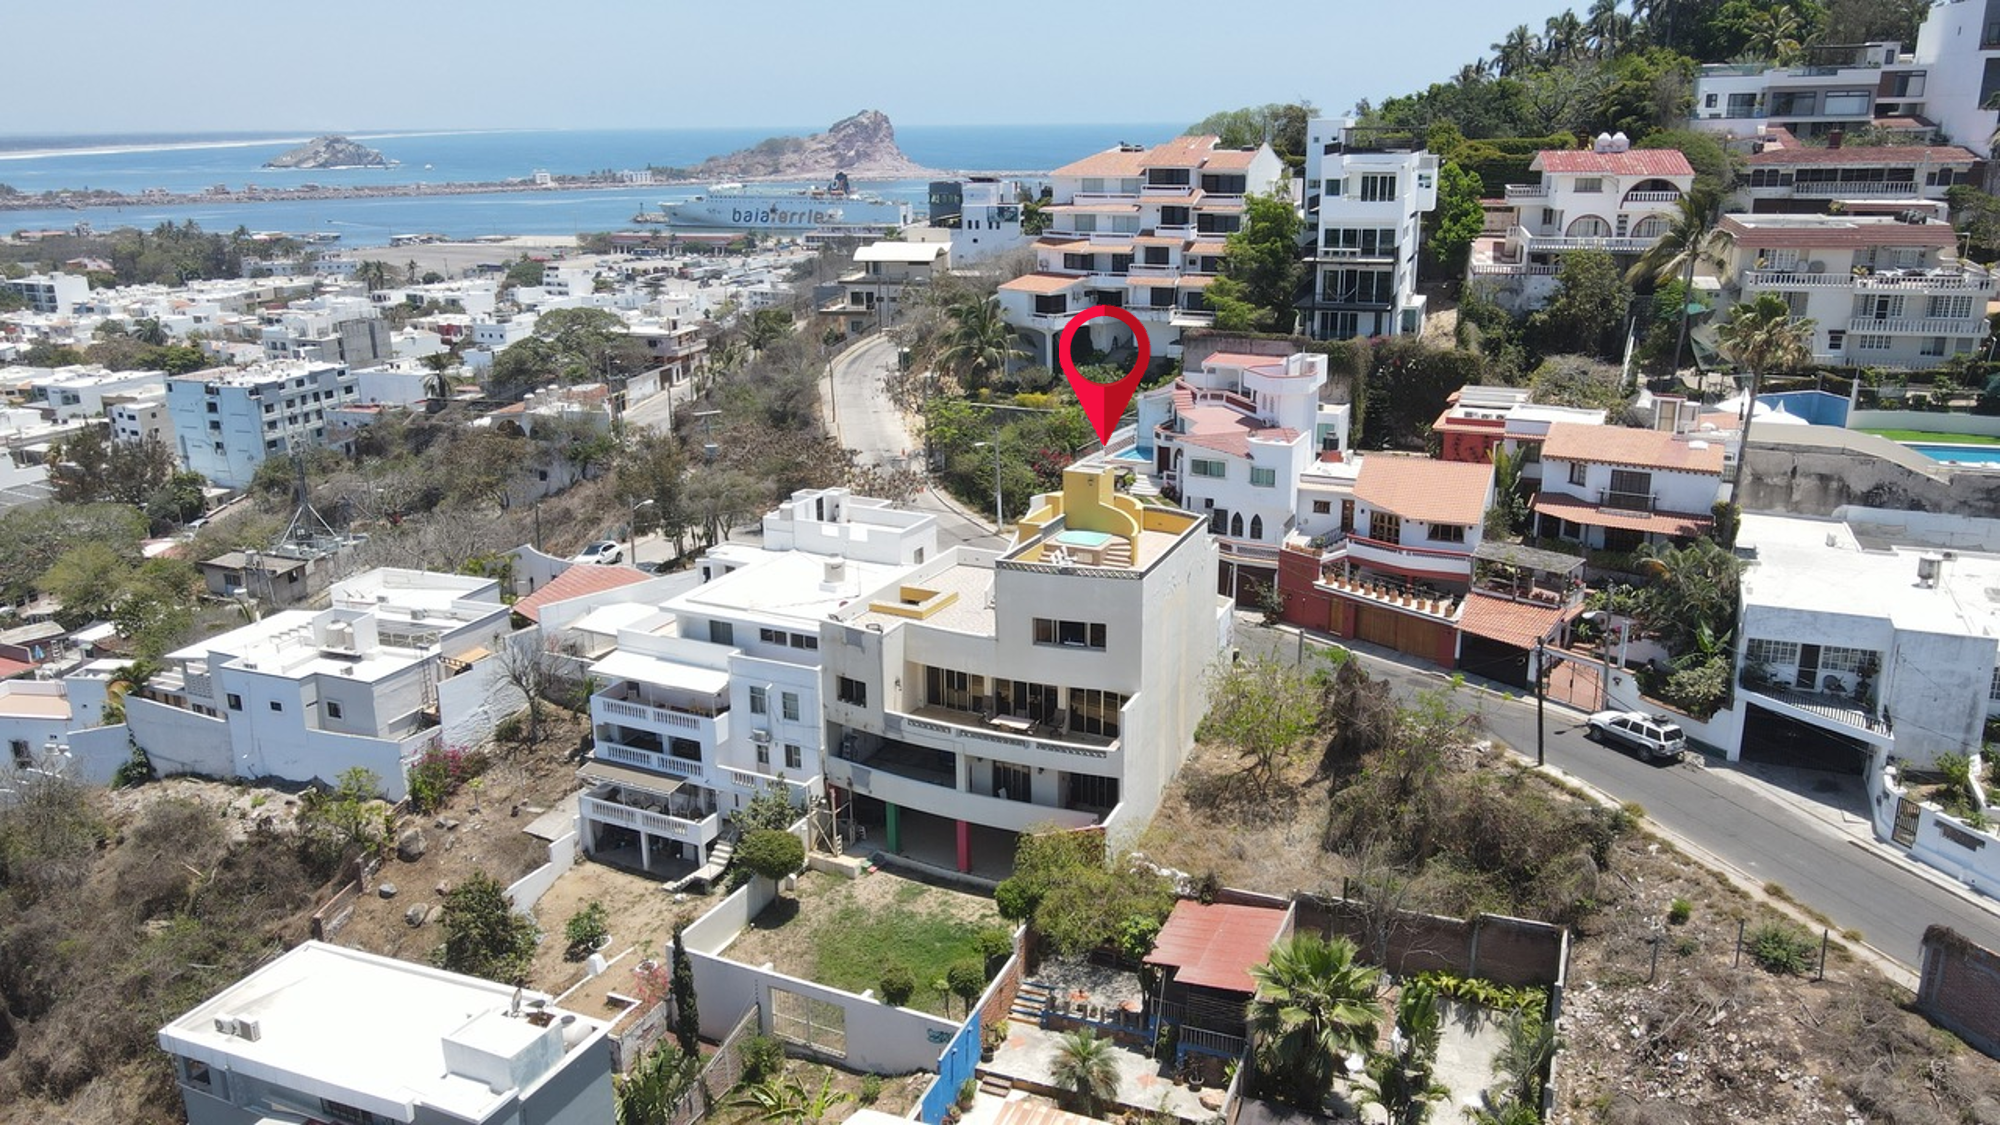 Spectacular house in Cerro del Vigia with beautiful views of the city and the sea.